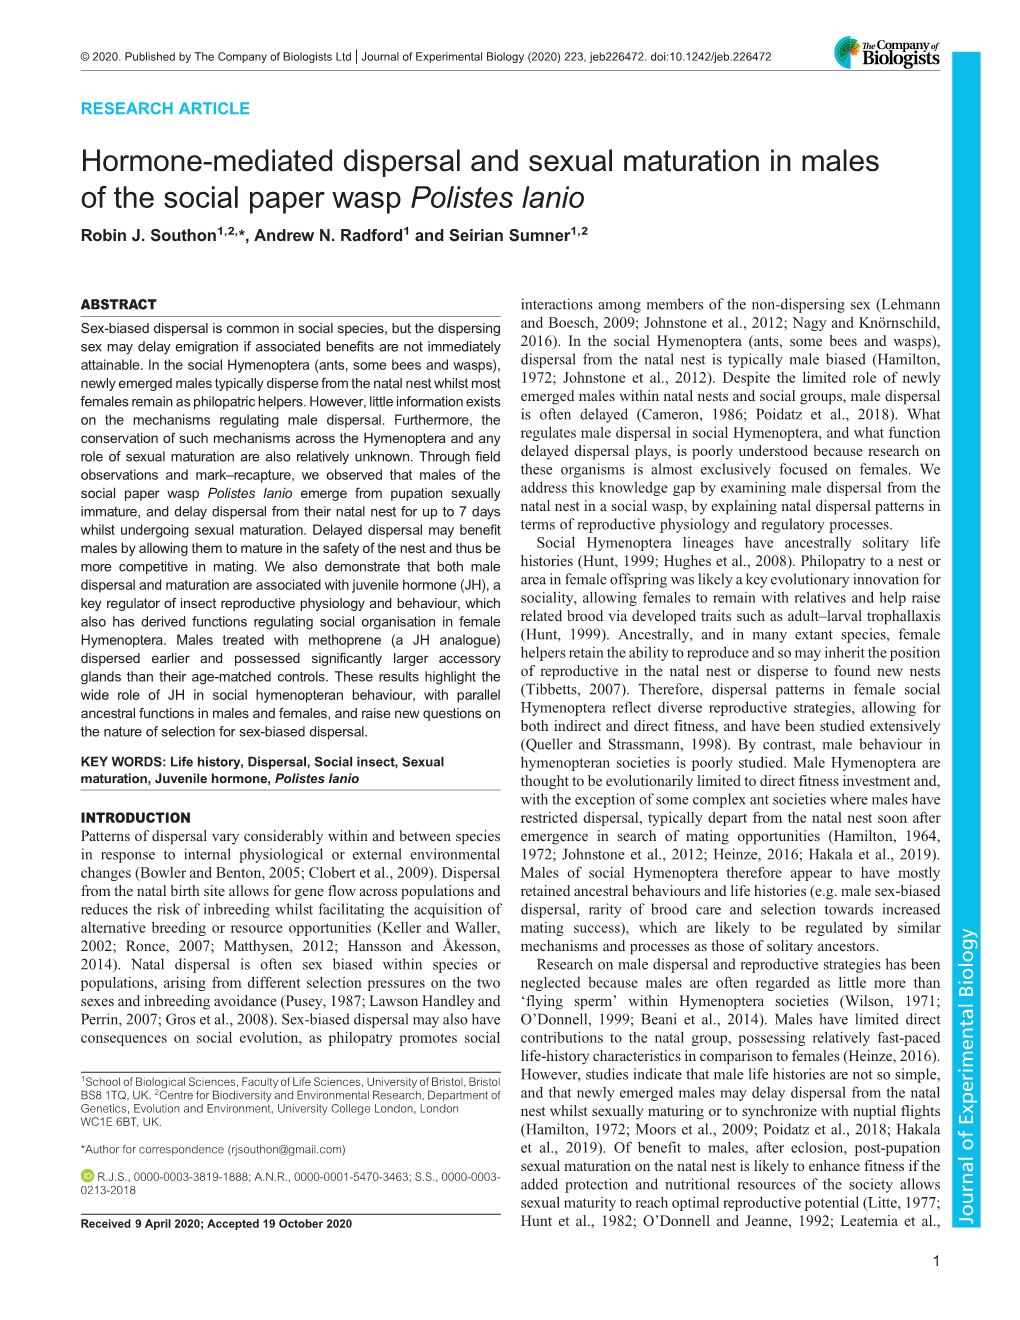 Hormone-Mediated Dispersal and Sexual Maturation in Males of the Social Paper Wasp Polistes Lanio Robin J